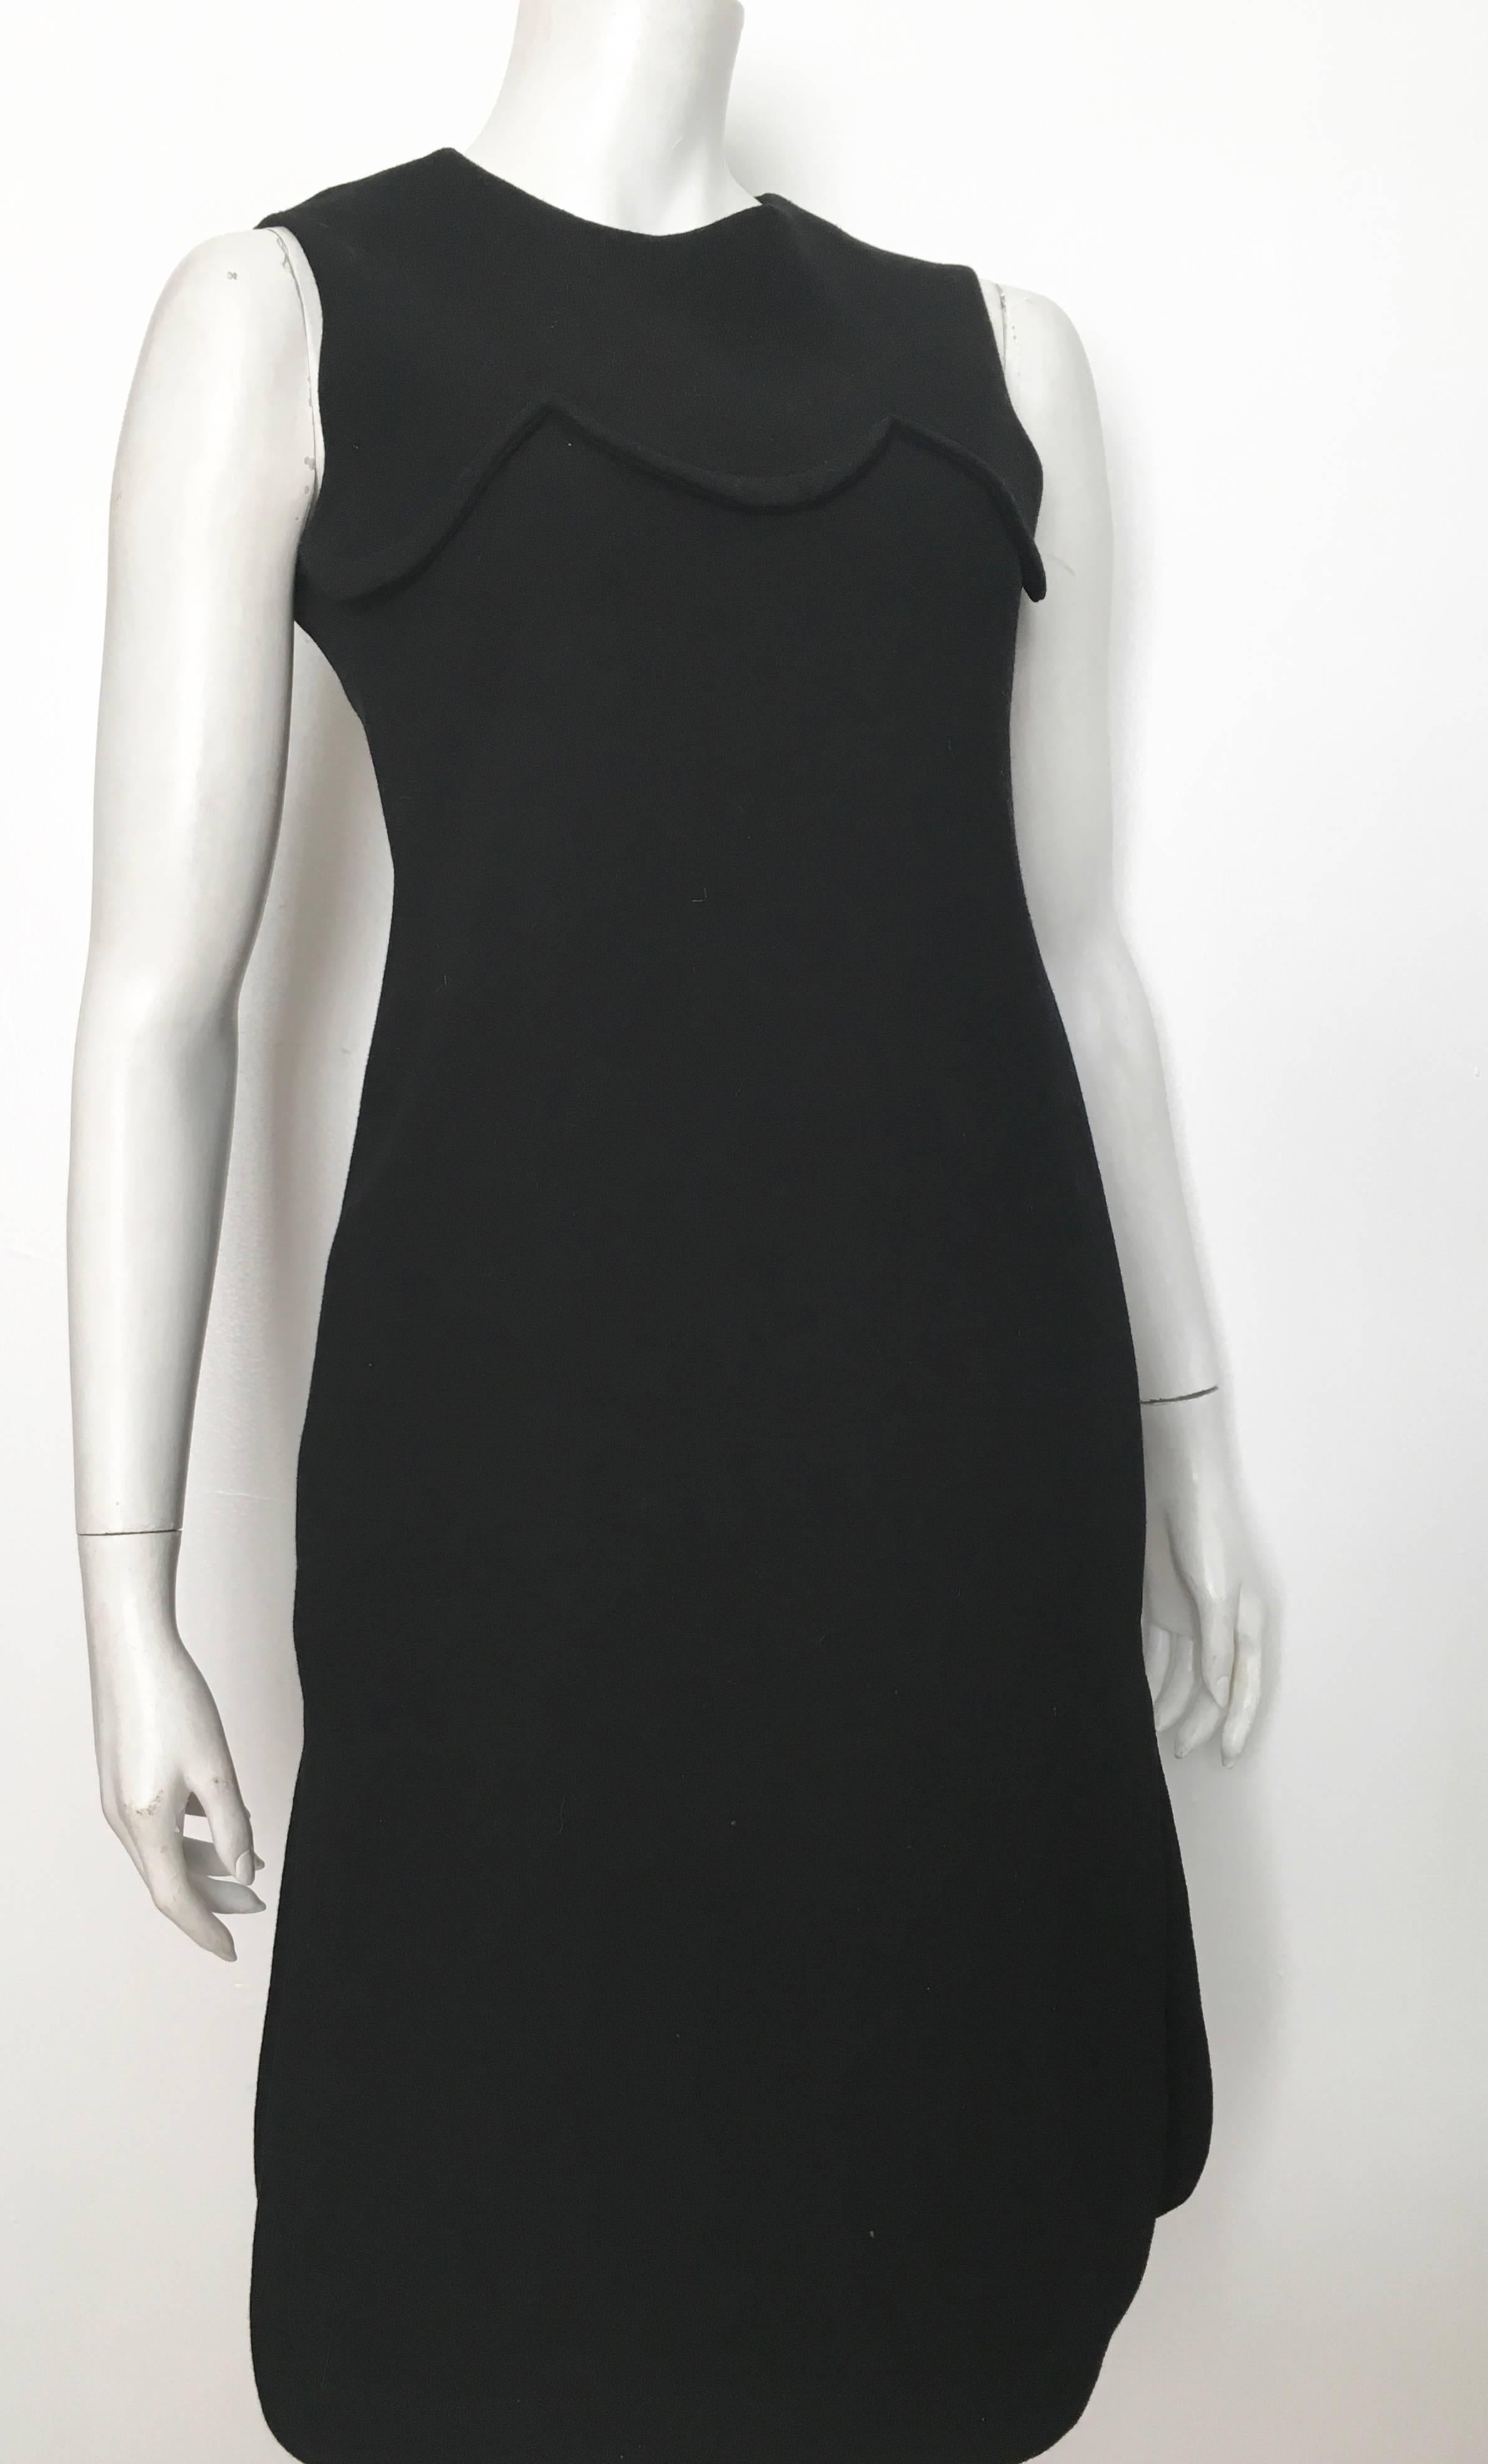 Pierre Cardin for Saks Fifth Avenue 1971 black thick wool sleeveless dress will fit a size 6.  Ladies please grab that amazing tape measure and measure your bust line, waist & hips to make certain this true vintage gem will fit your lovely body.